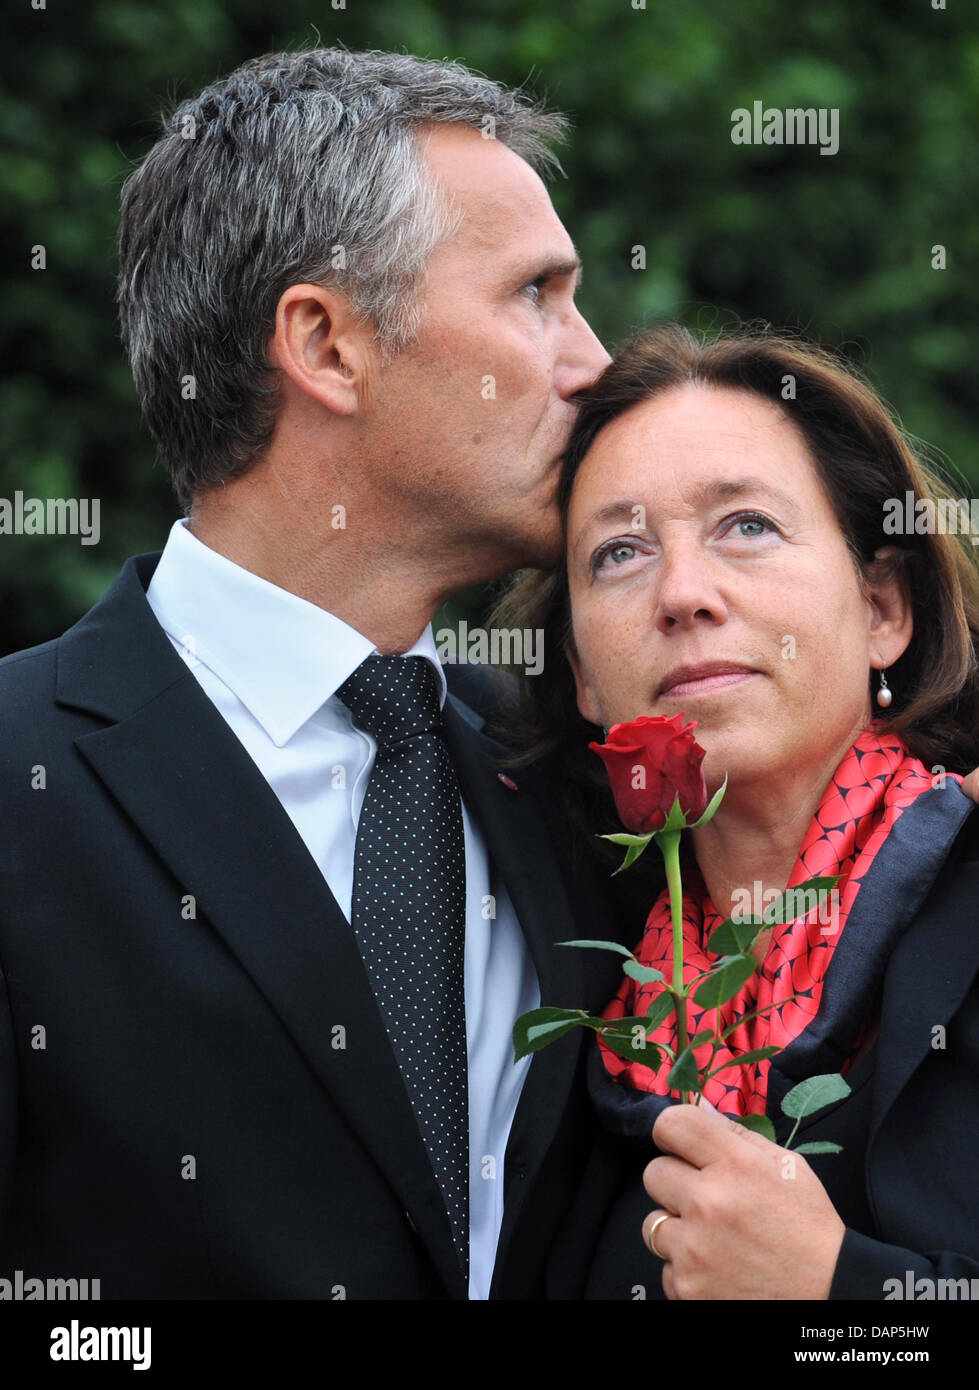 Norway's Prime Minister Jens Stoltenberg and his wife Ingrid are taking part of the rose march in Oslo, Norway, 25 July 2011. The Norwegian man charged in last week's attacks in Norway, which claimed at least 76 lives, was Monday remanded in custody for eight weeks by Oslo district court. A. B. Breivik was charged with the bombing in Oslo's government district on Friday and a shoot Stock Photo